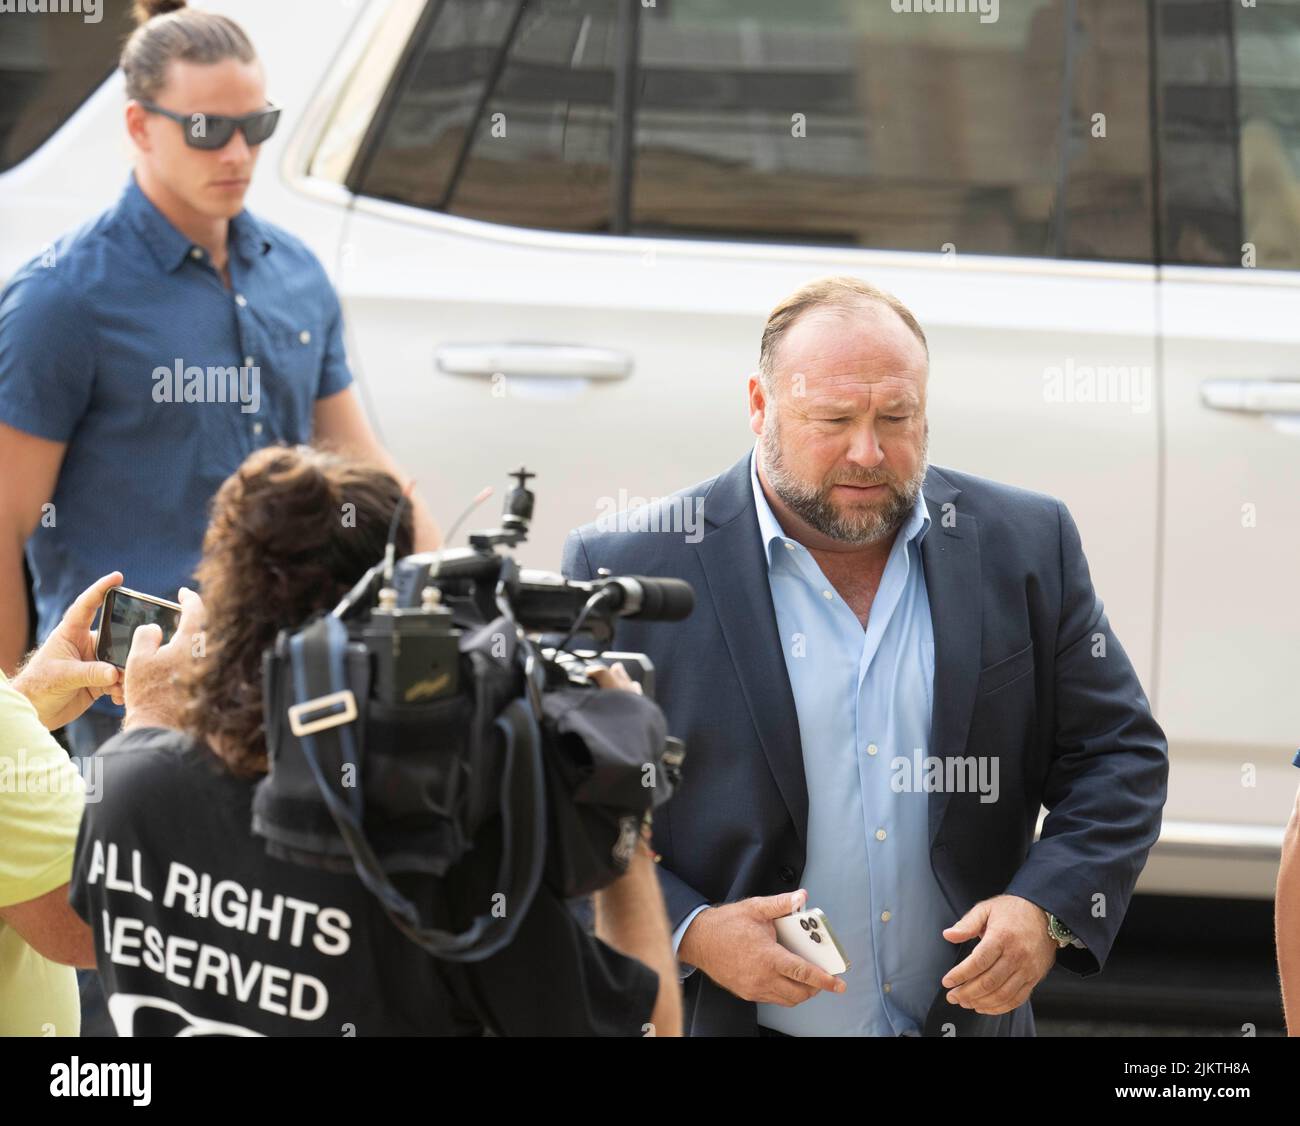 Flanked by a security team, ALEX JONES arrives in the morning at the Travis County Courthouse in Austin for day 7 of the his defamation trial with Sandy Hook survivors on August 3, 2022. Jones took the stand for a second time and the trial is expected to end this week. Credit: Bob Daemmrich/Alamy Live News Stock Photo